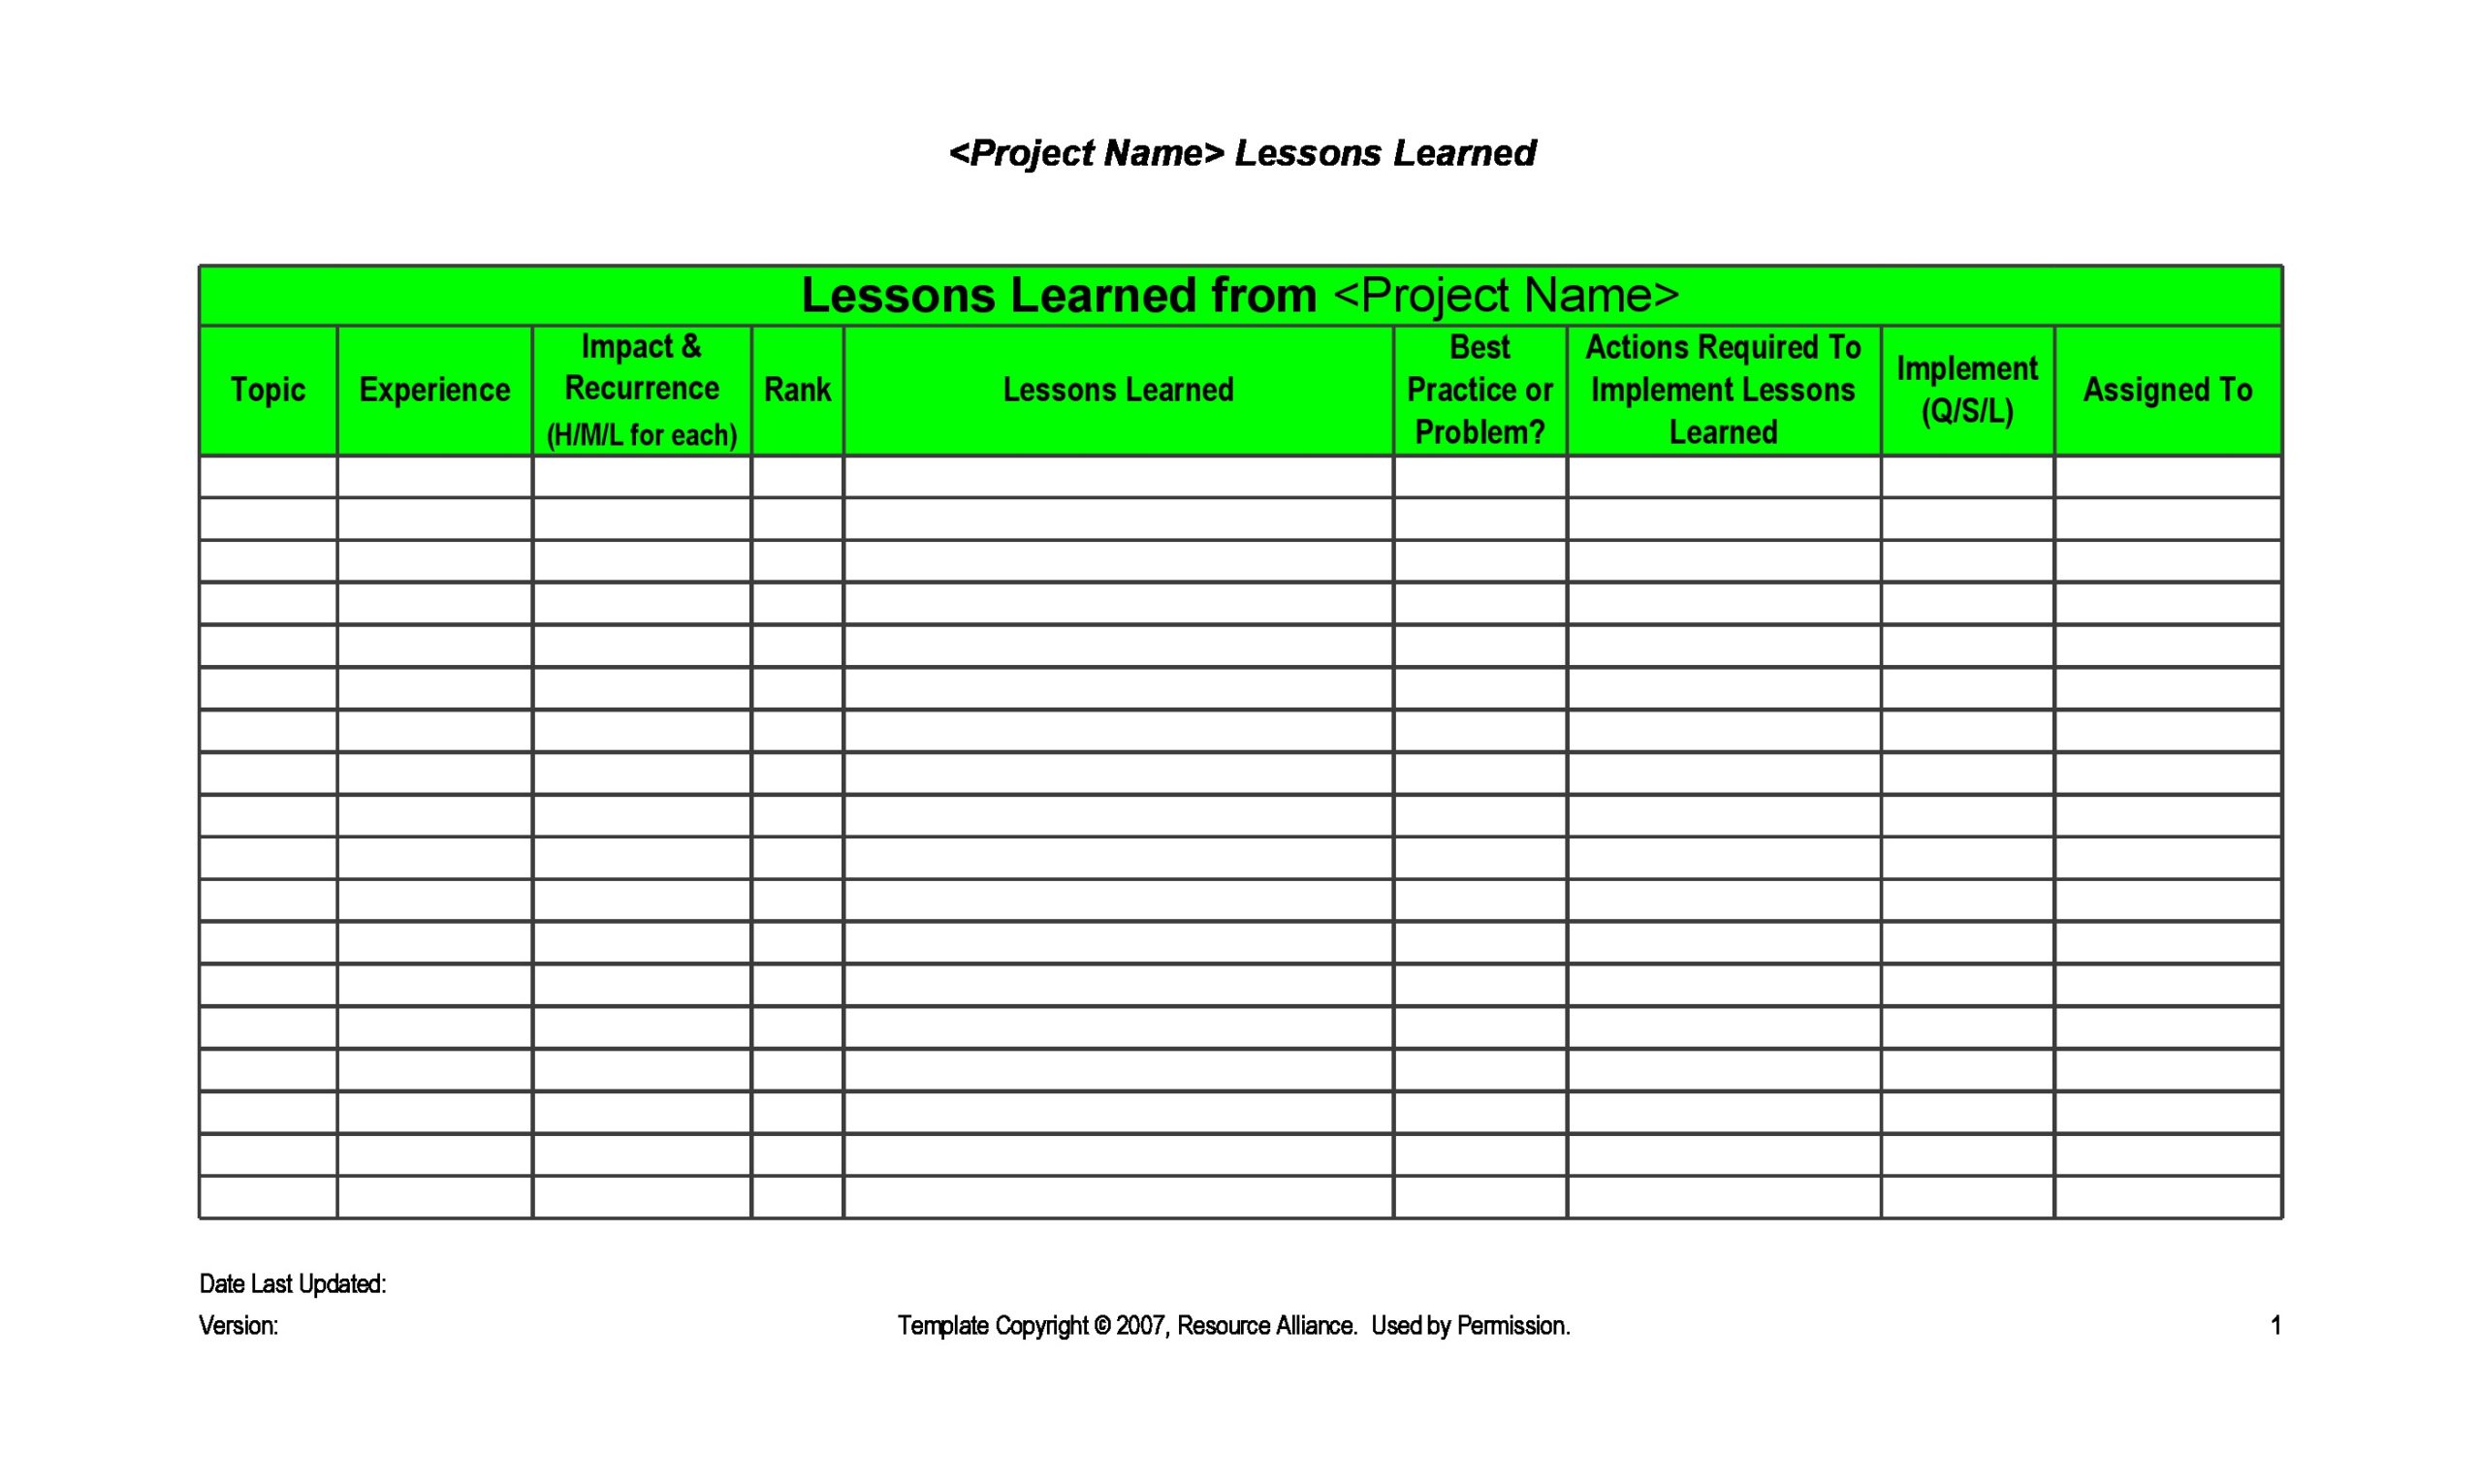 21 Best Lessons Learned Templates [Excel, Word] ᐅ TemplateLab  NCGo With Lessons Learnt Report Template